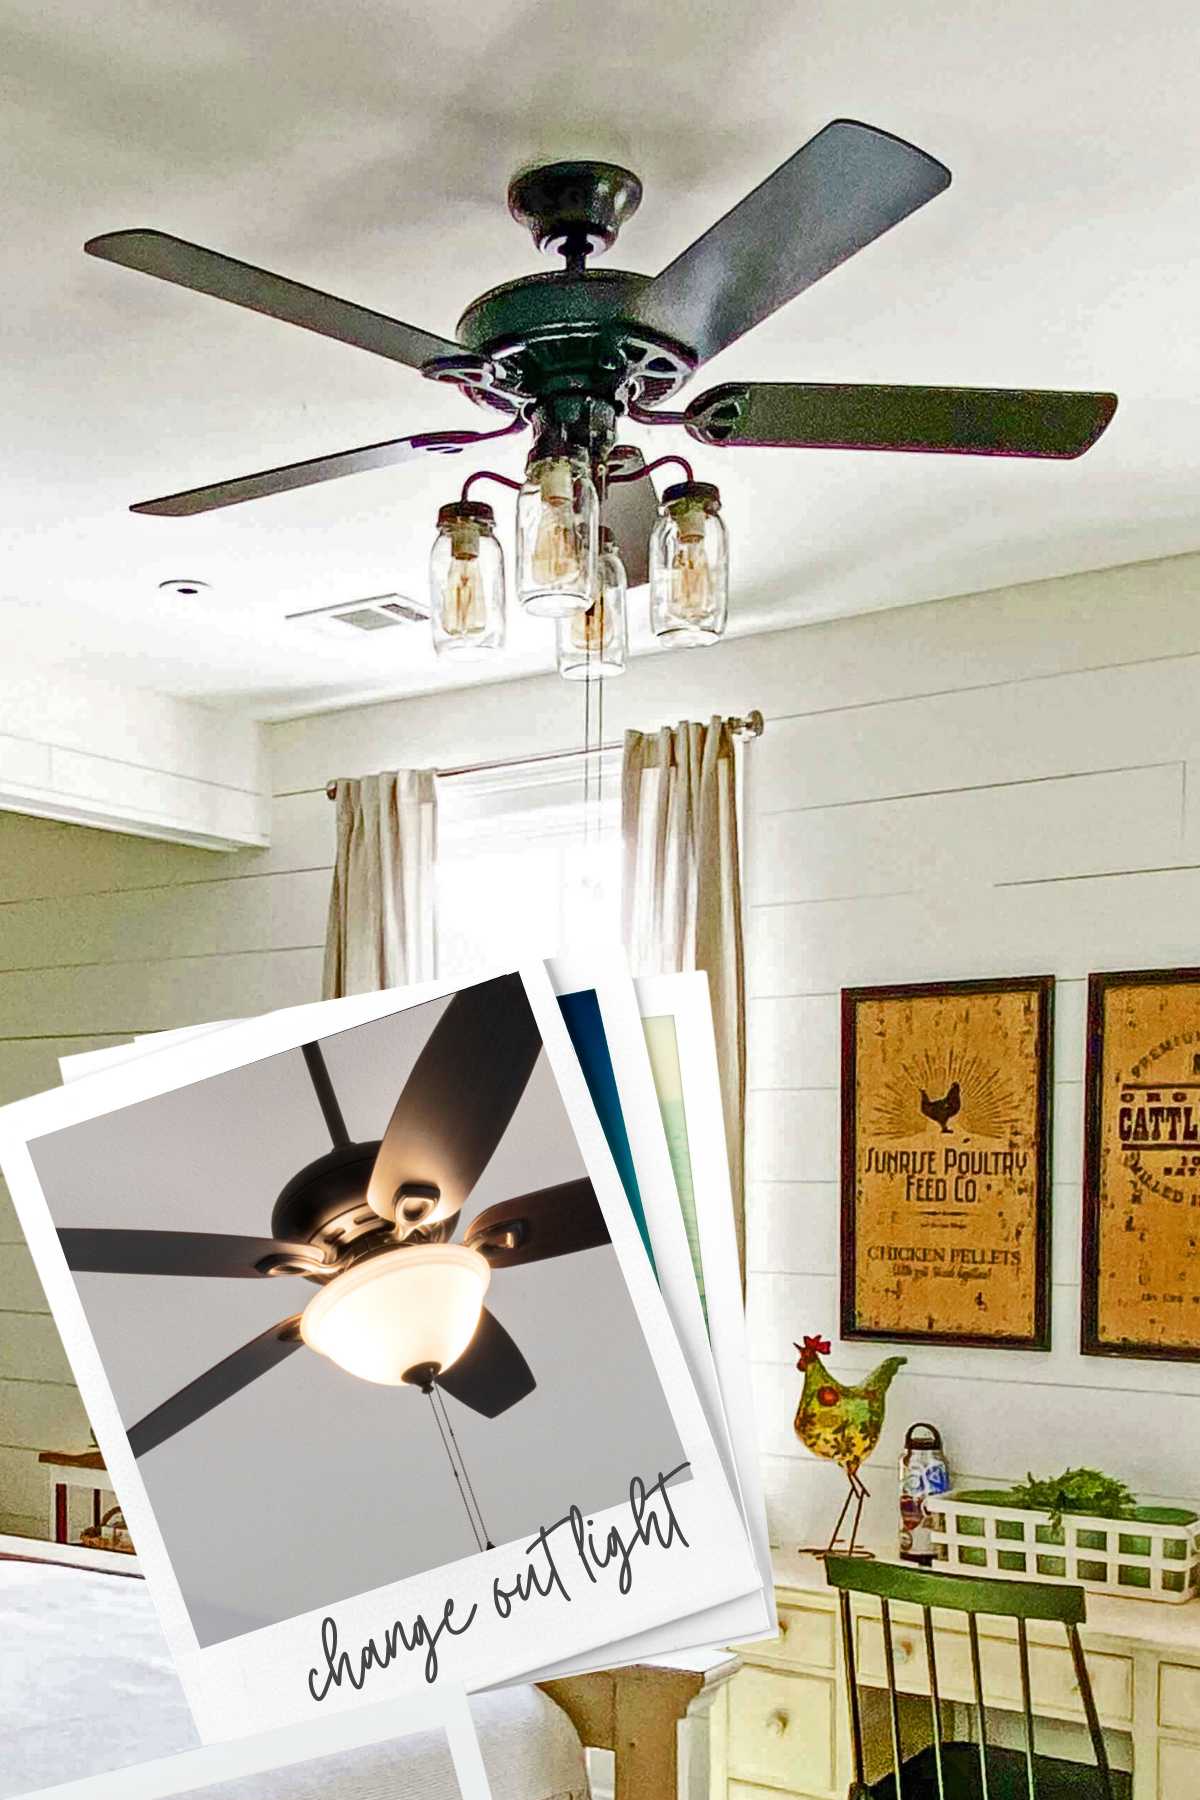 Why Buy a Ceiling Fan With Lights?